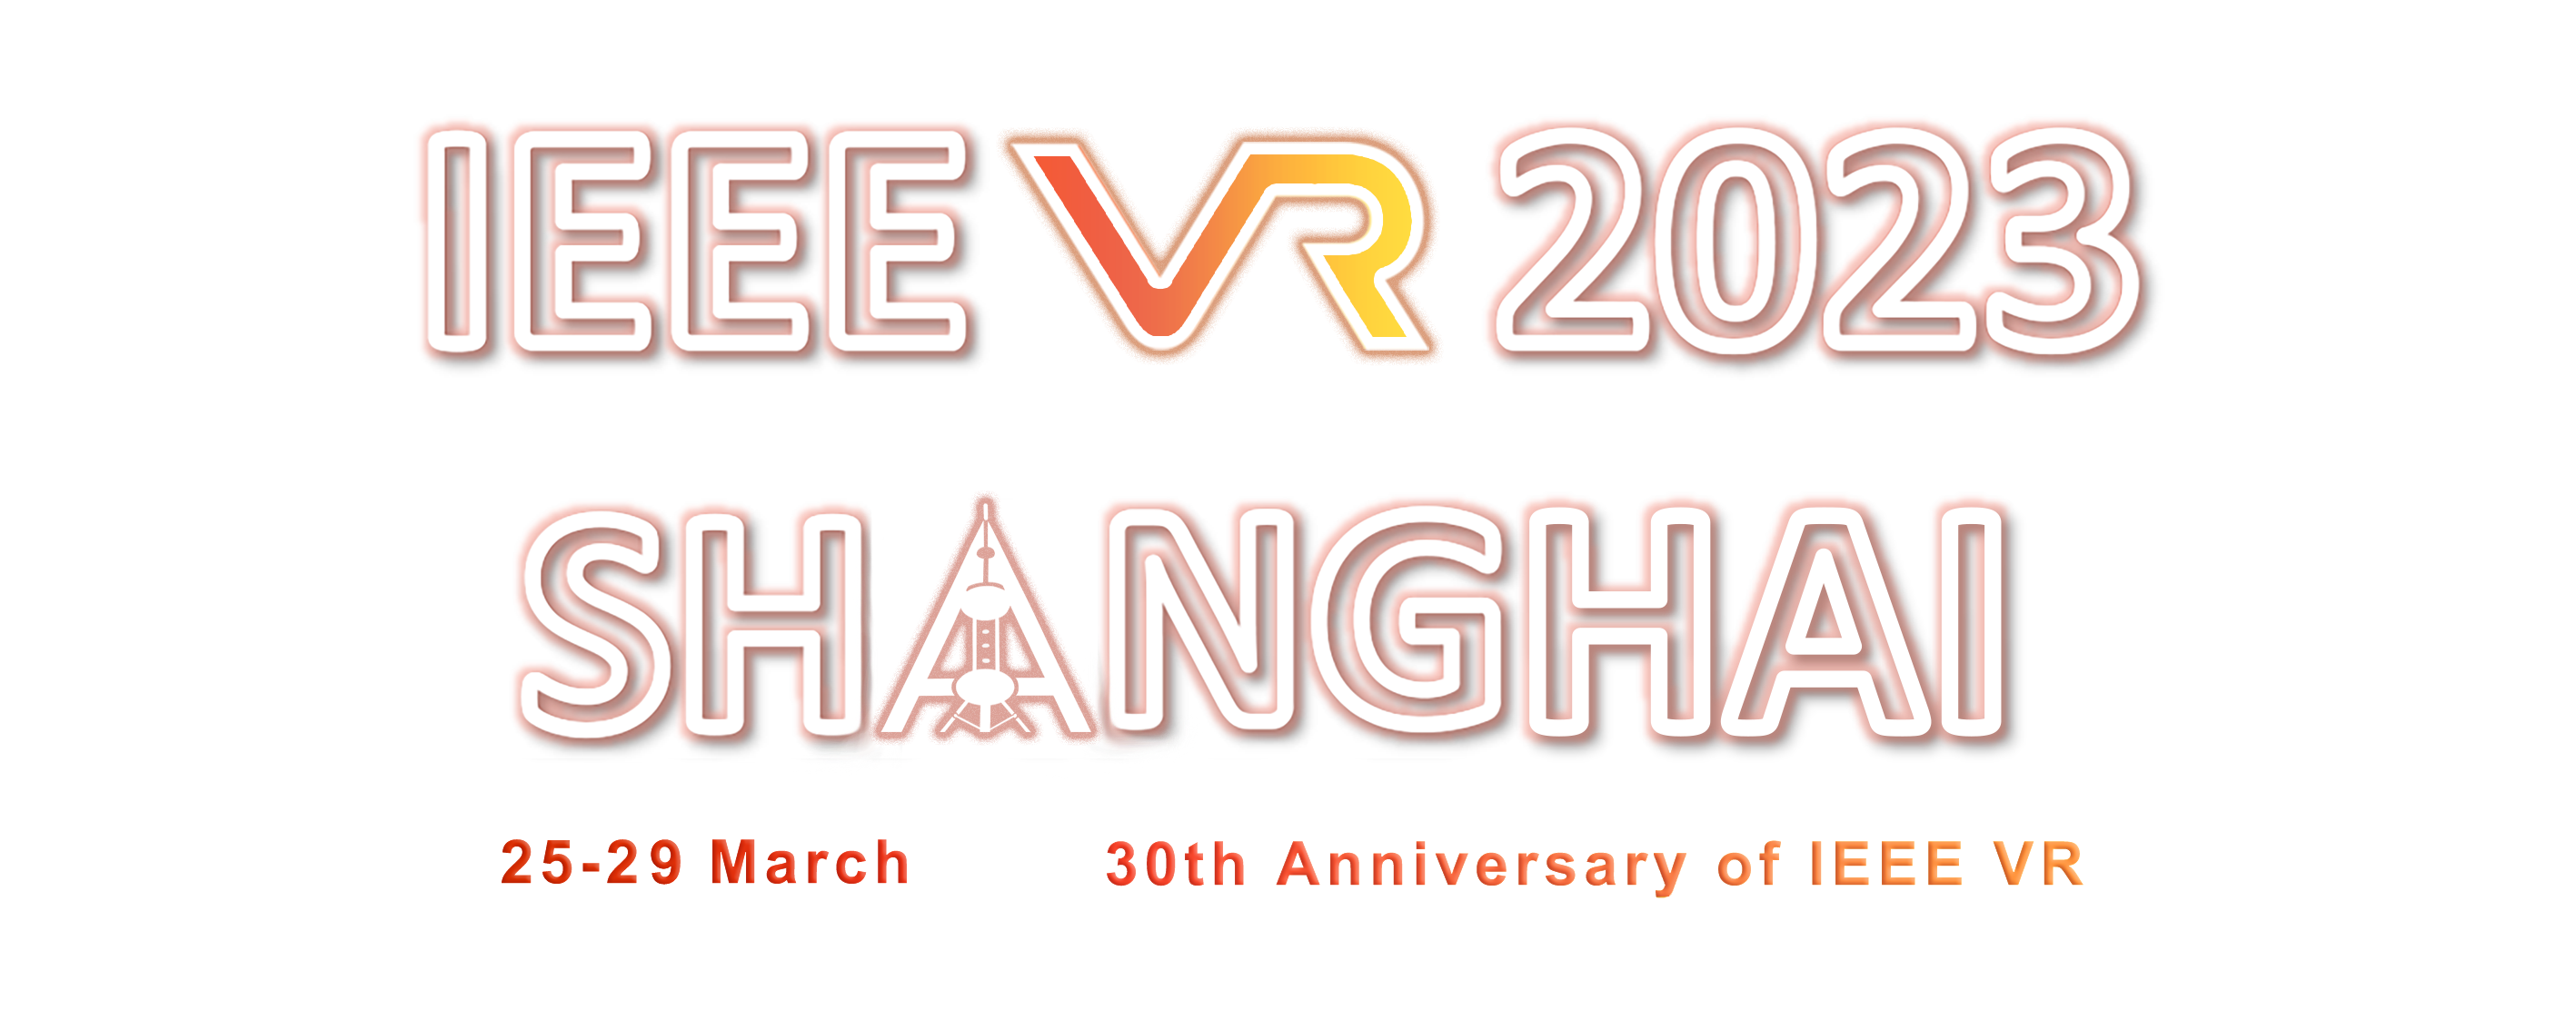 The IEEE VR 2023 logo.